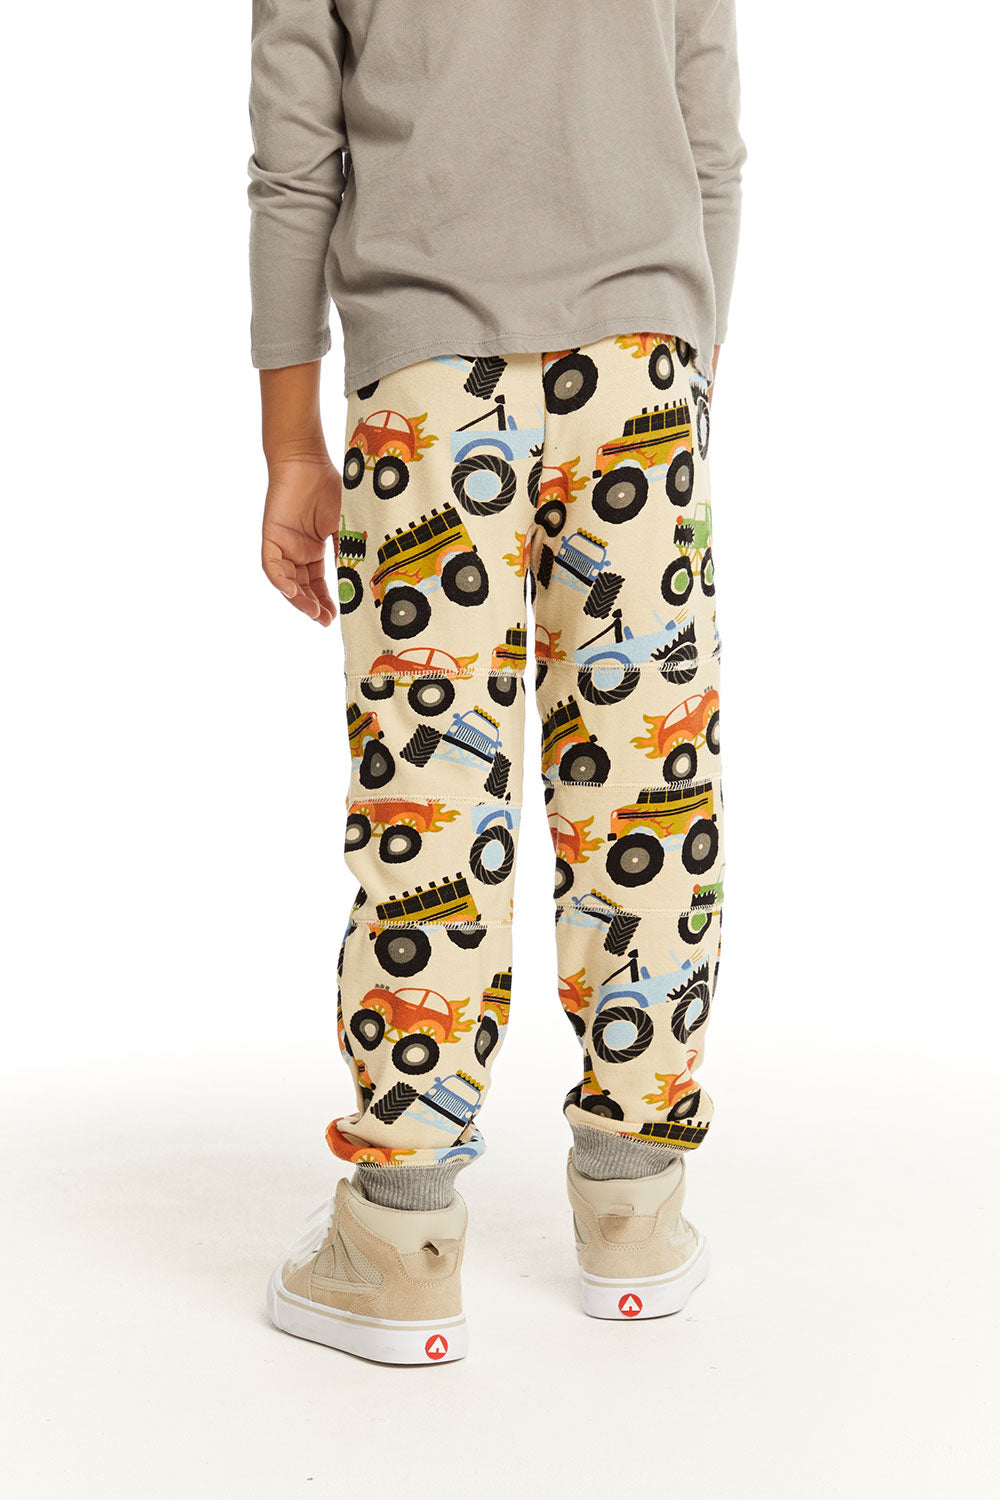 Cozy Knit Monster Truck Pant with Seamed Panels BOYS chaserbrand